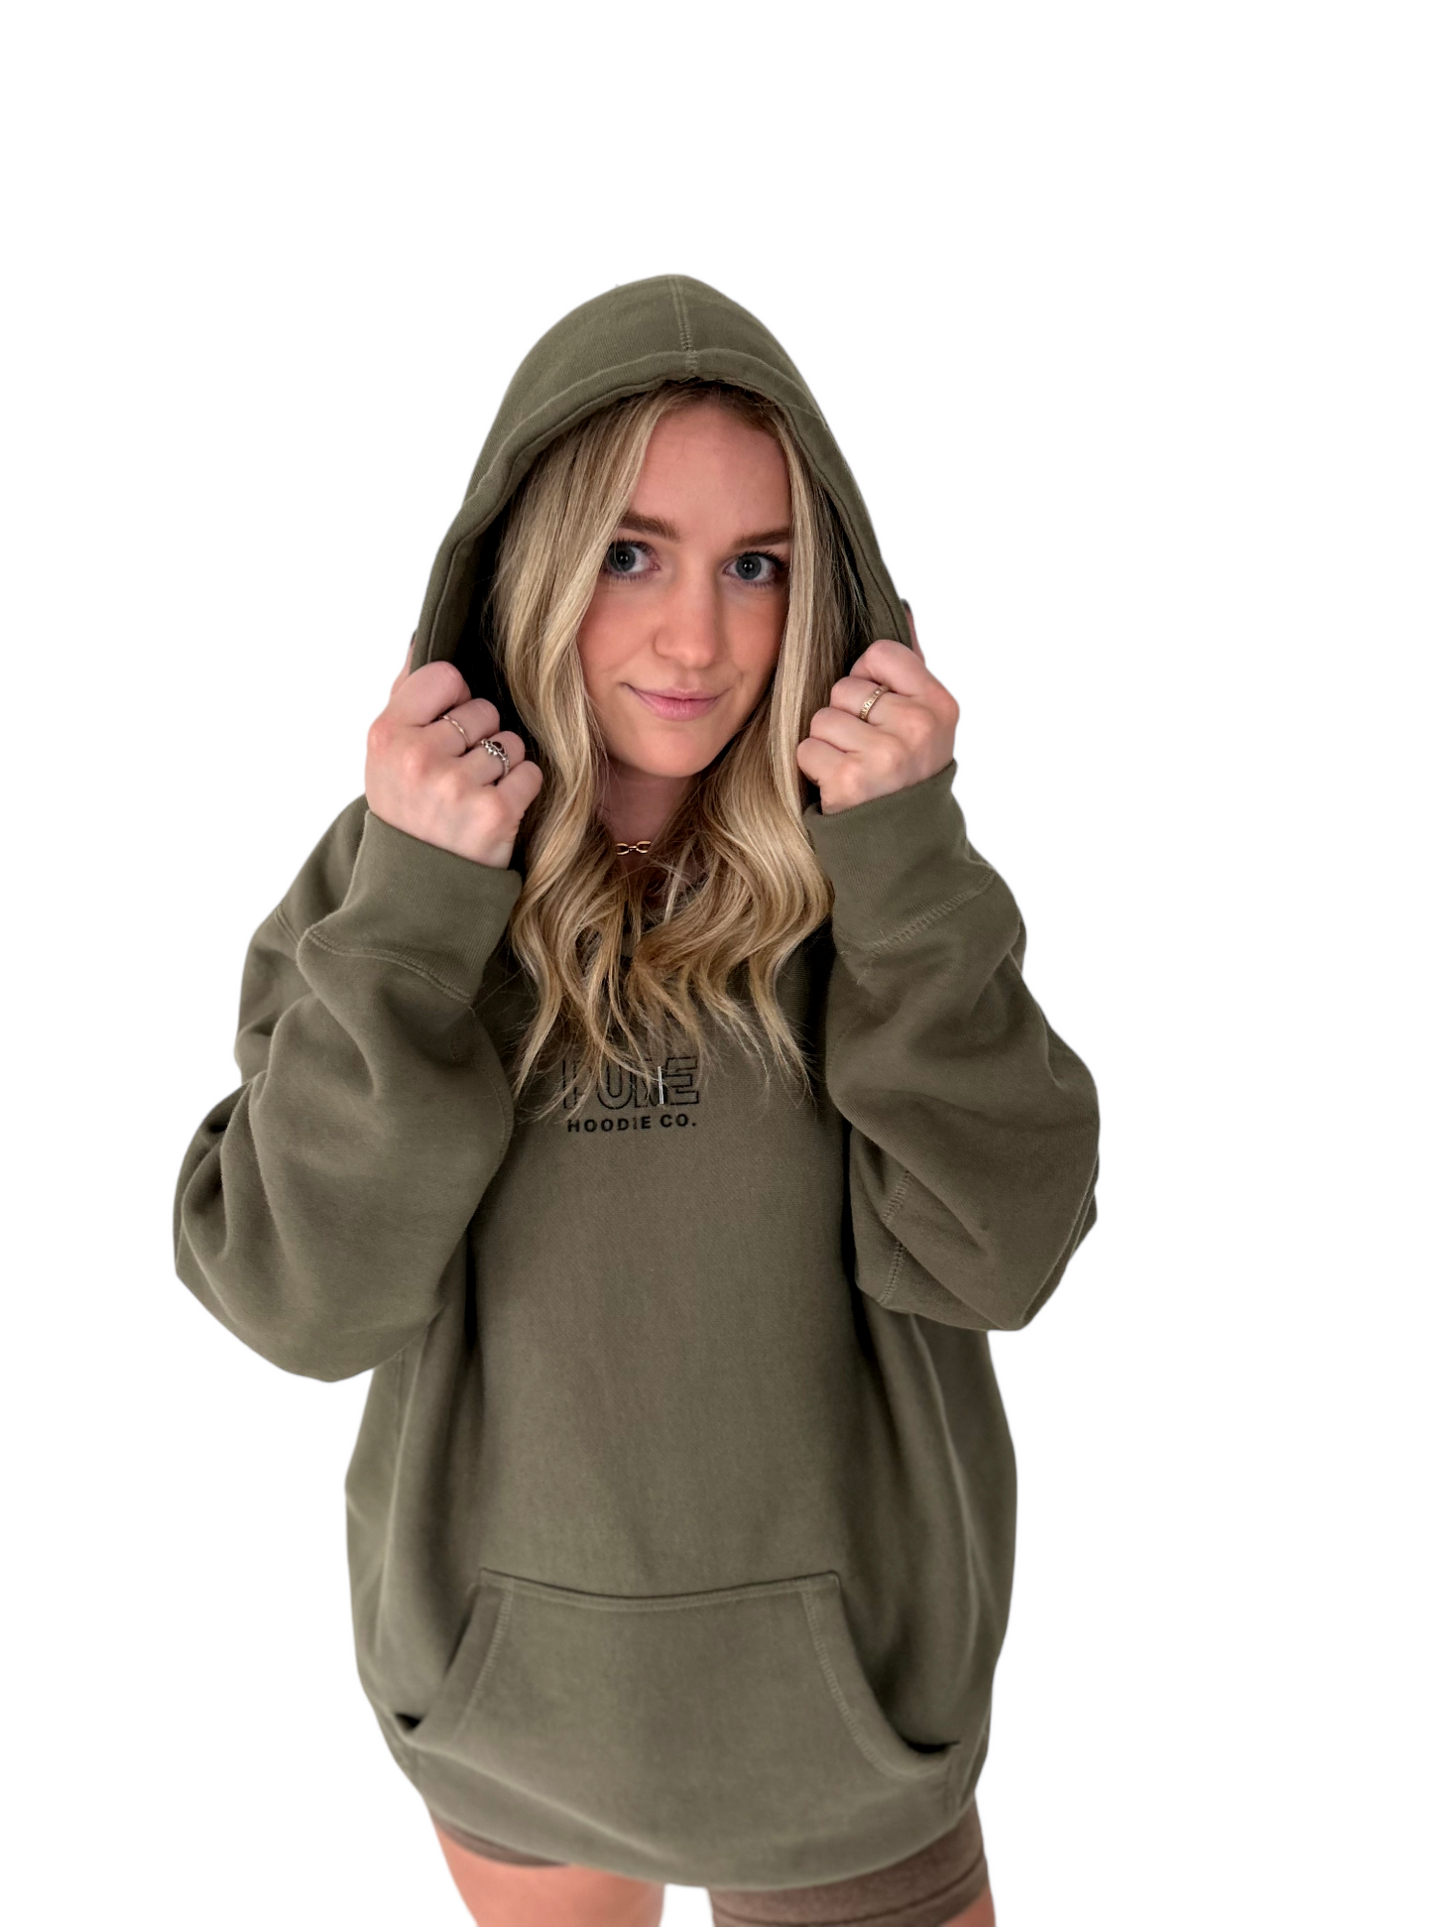 Pure Hoodie Co. Olive Green Extra-Heavyweight Unisex Hoodie